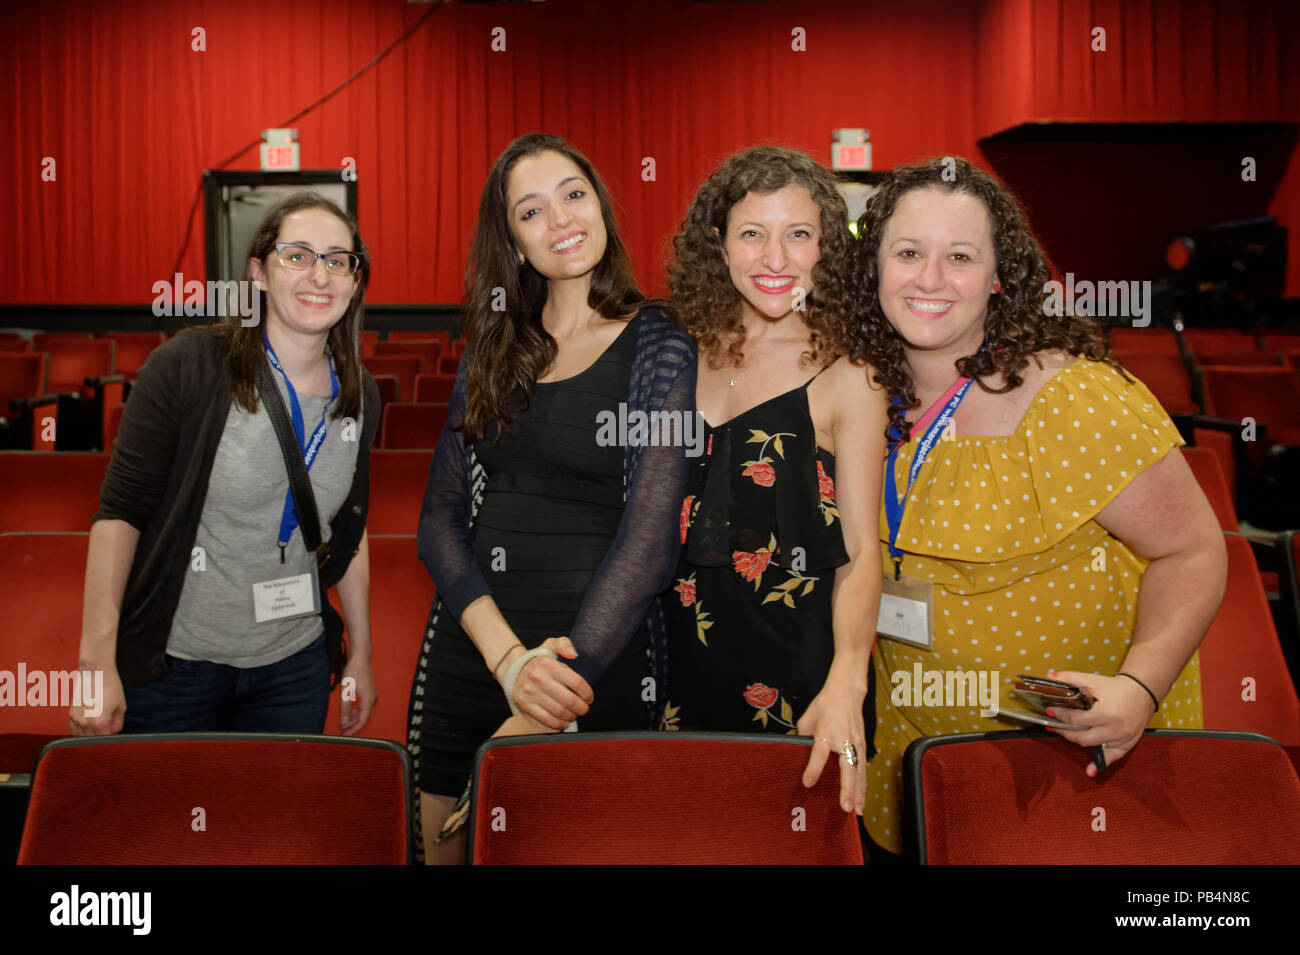 Bellmore, New York, USA. July 18, 2018. L-R, STEPHANIE DONNELLY, director and writer of short film The Adventures of Penny Patterson; AJNA JAI, actor playing Penny Patterson; BETHANY NICOLE TAYLOR, lead actress in romcom short film Joe; and SHARA ASHLEY ZEIGER, producer and writer of film Joe, chat after final block of films at LIIFE 2018, the Long Island International Film Expo. Stock Photo